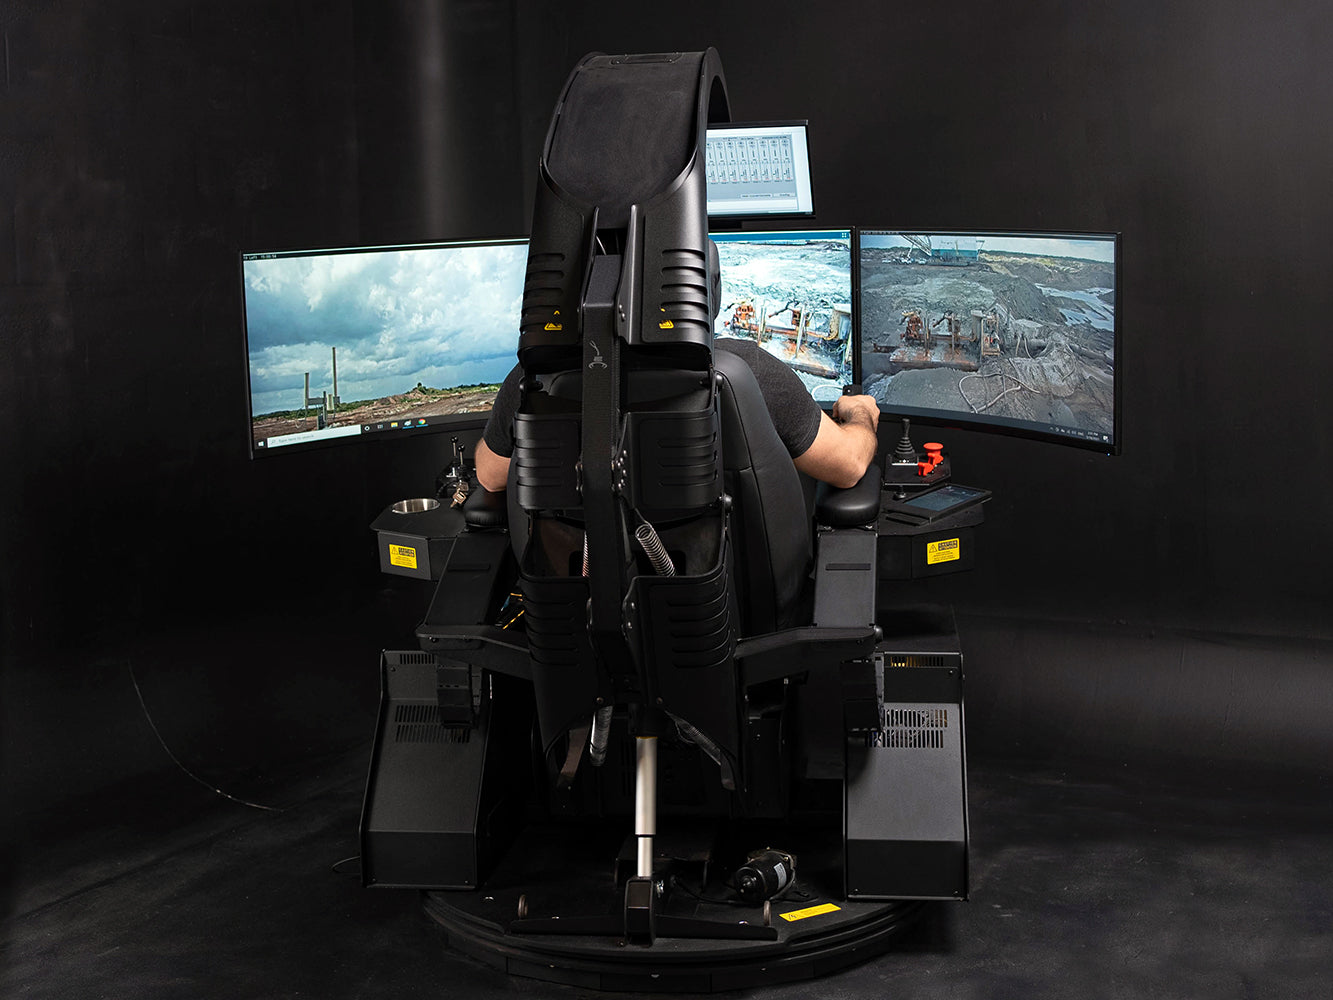 Emperor ROS workstation with curved monitors back view